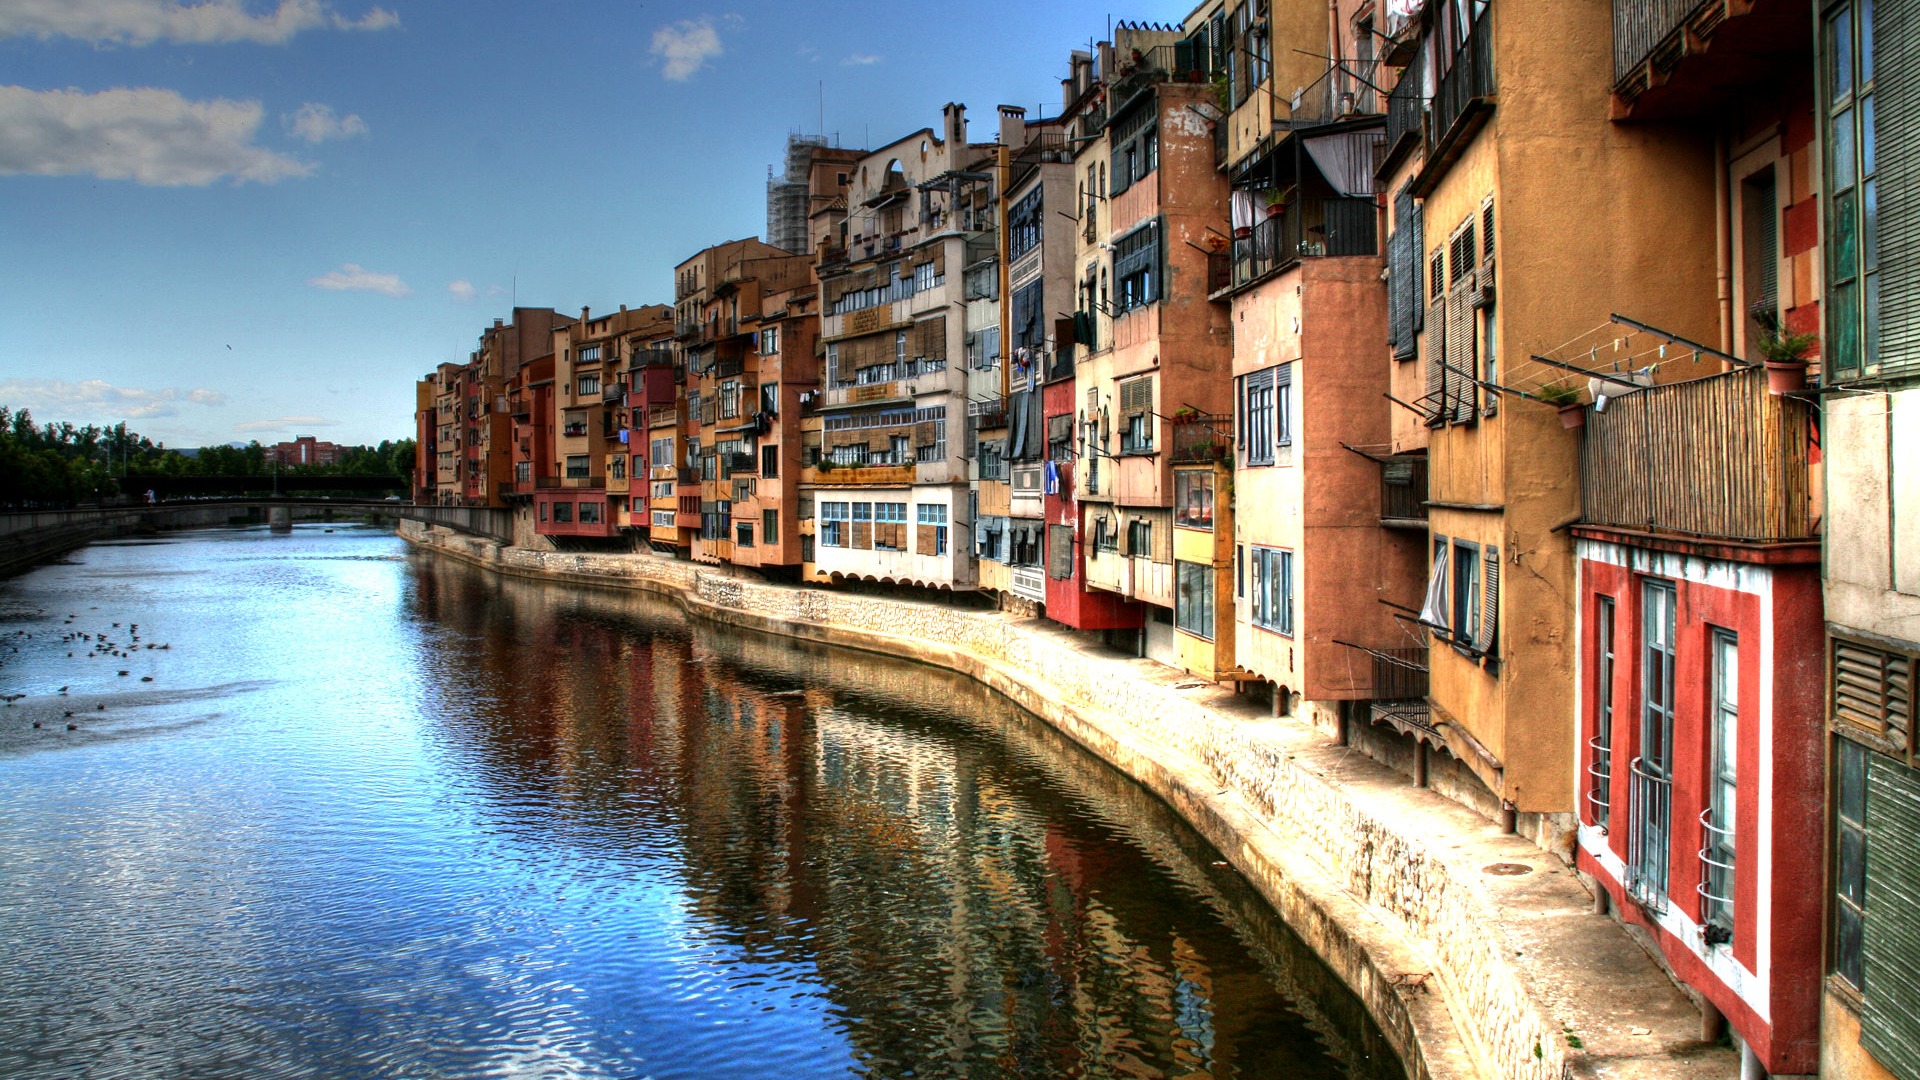 Spain Girona HDR-style wallpapers #1 - 1920x1080